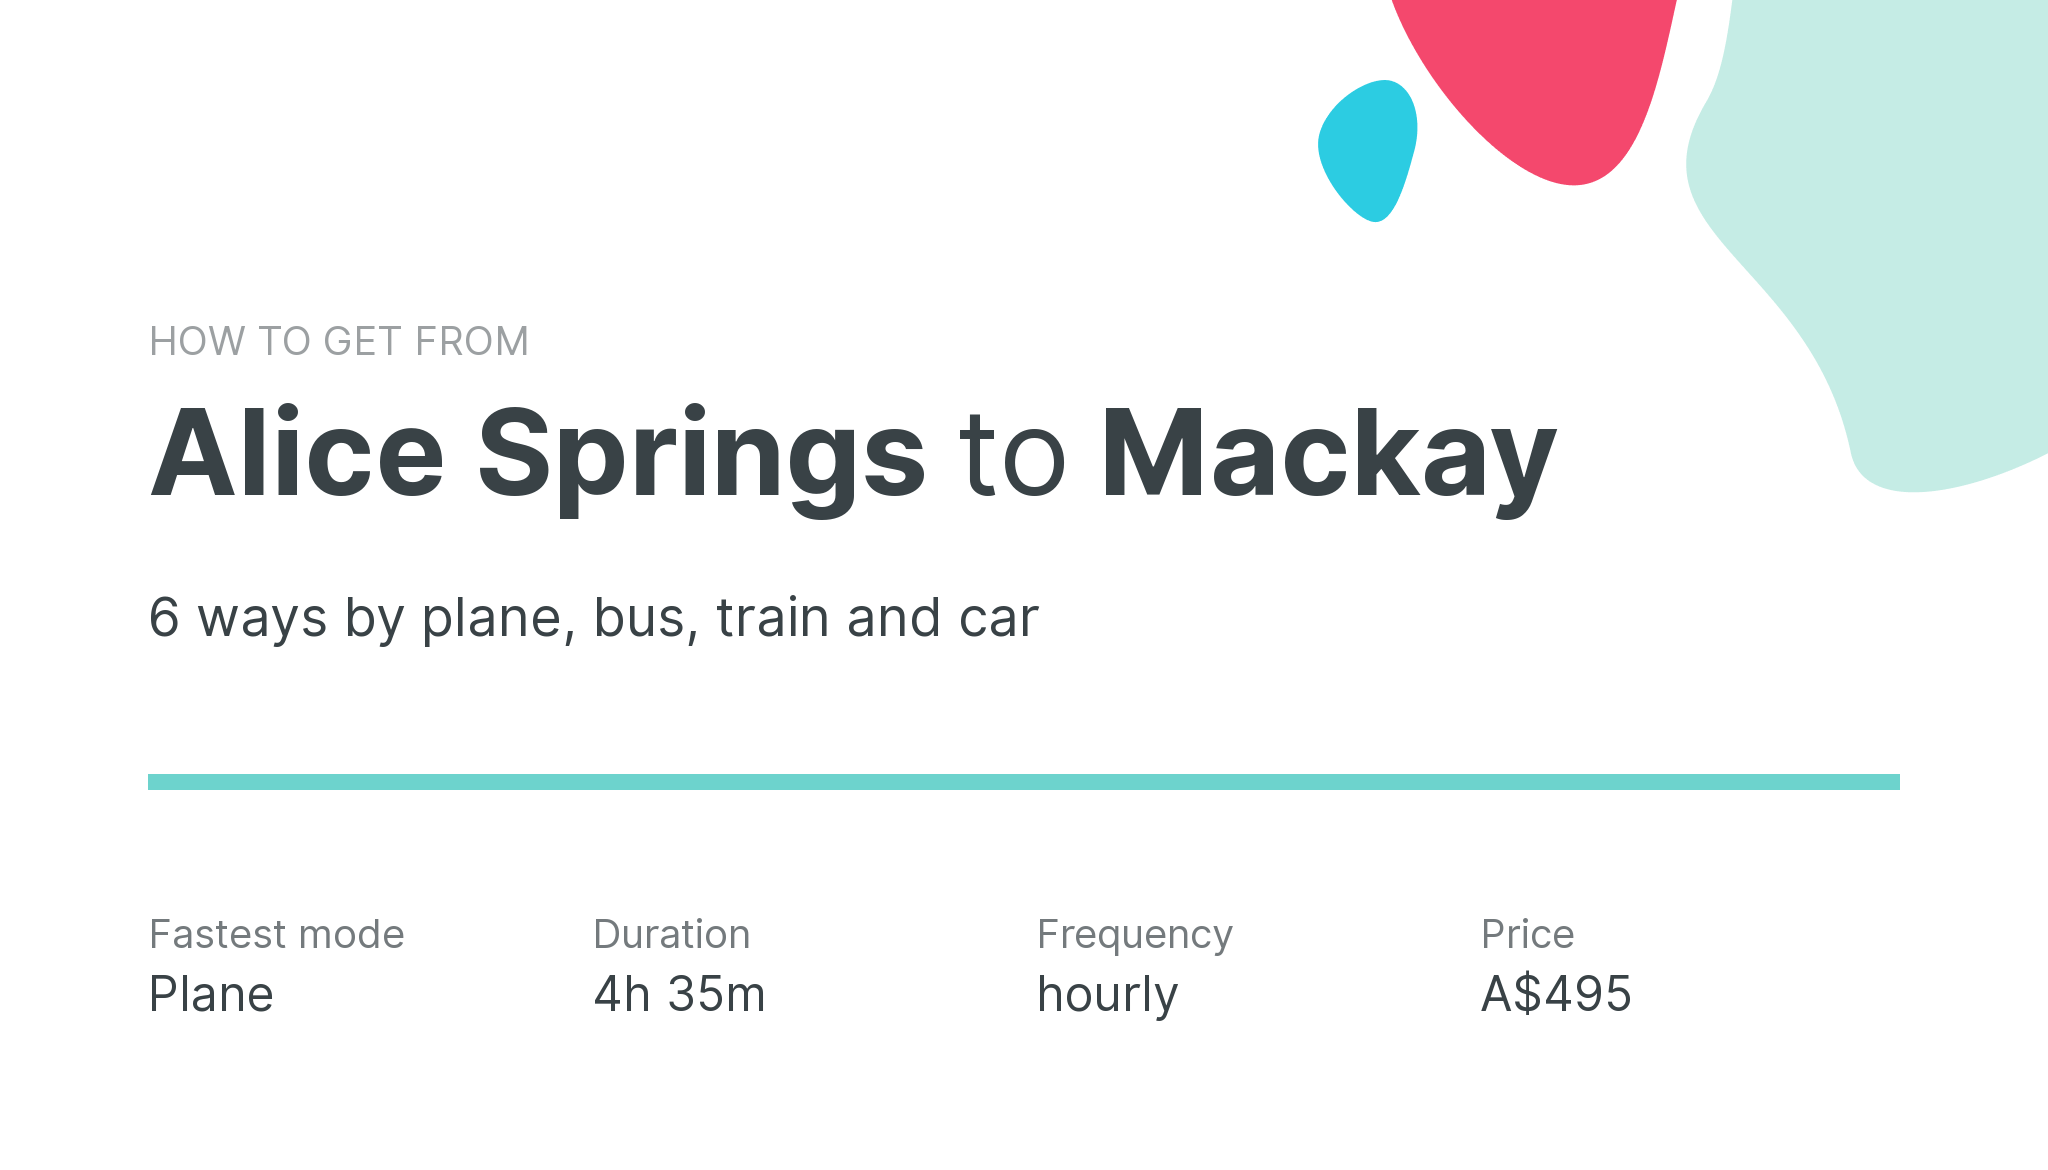 How do I get from Alice Springs to Mackay